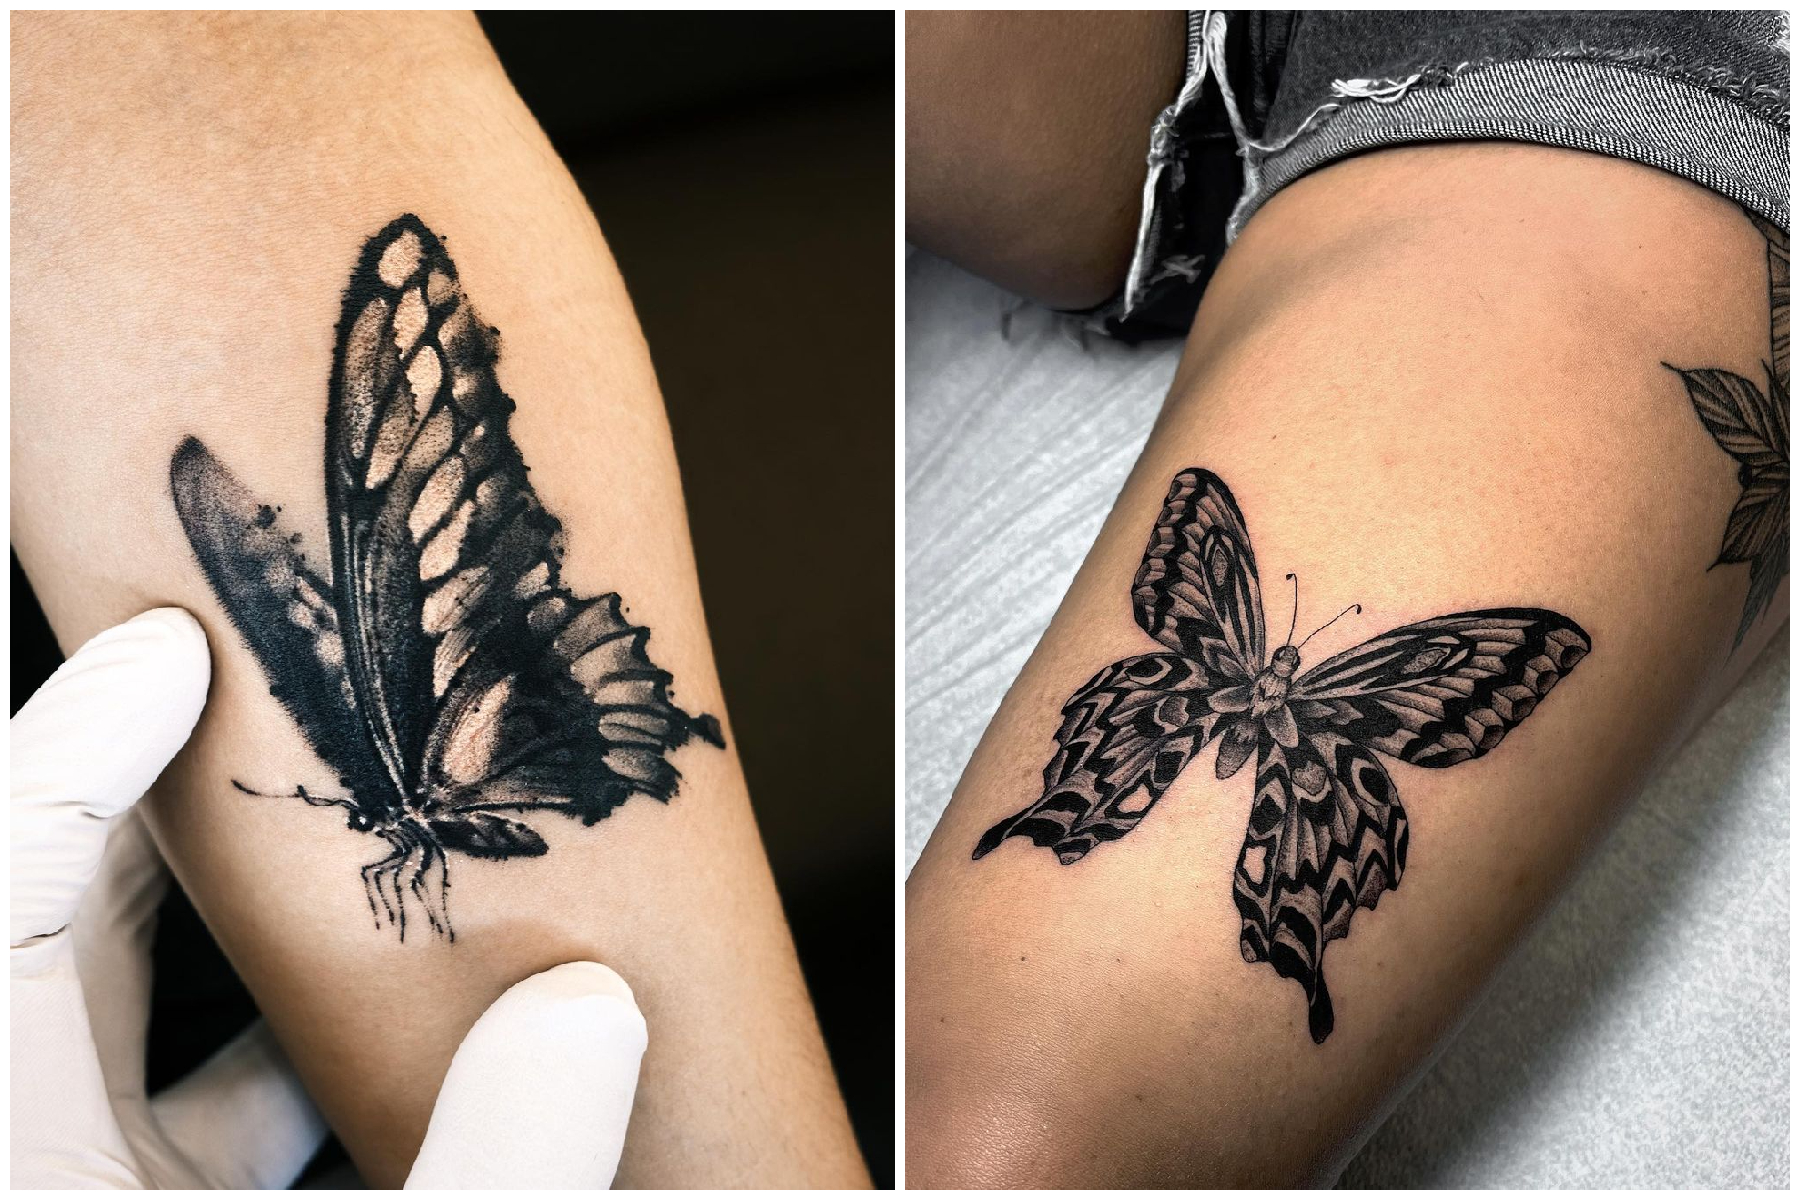 30 Unalome Tattoo Ideas Inspiring Designs and Their Meaning  100 Tattoos